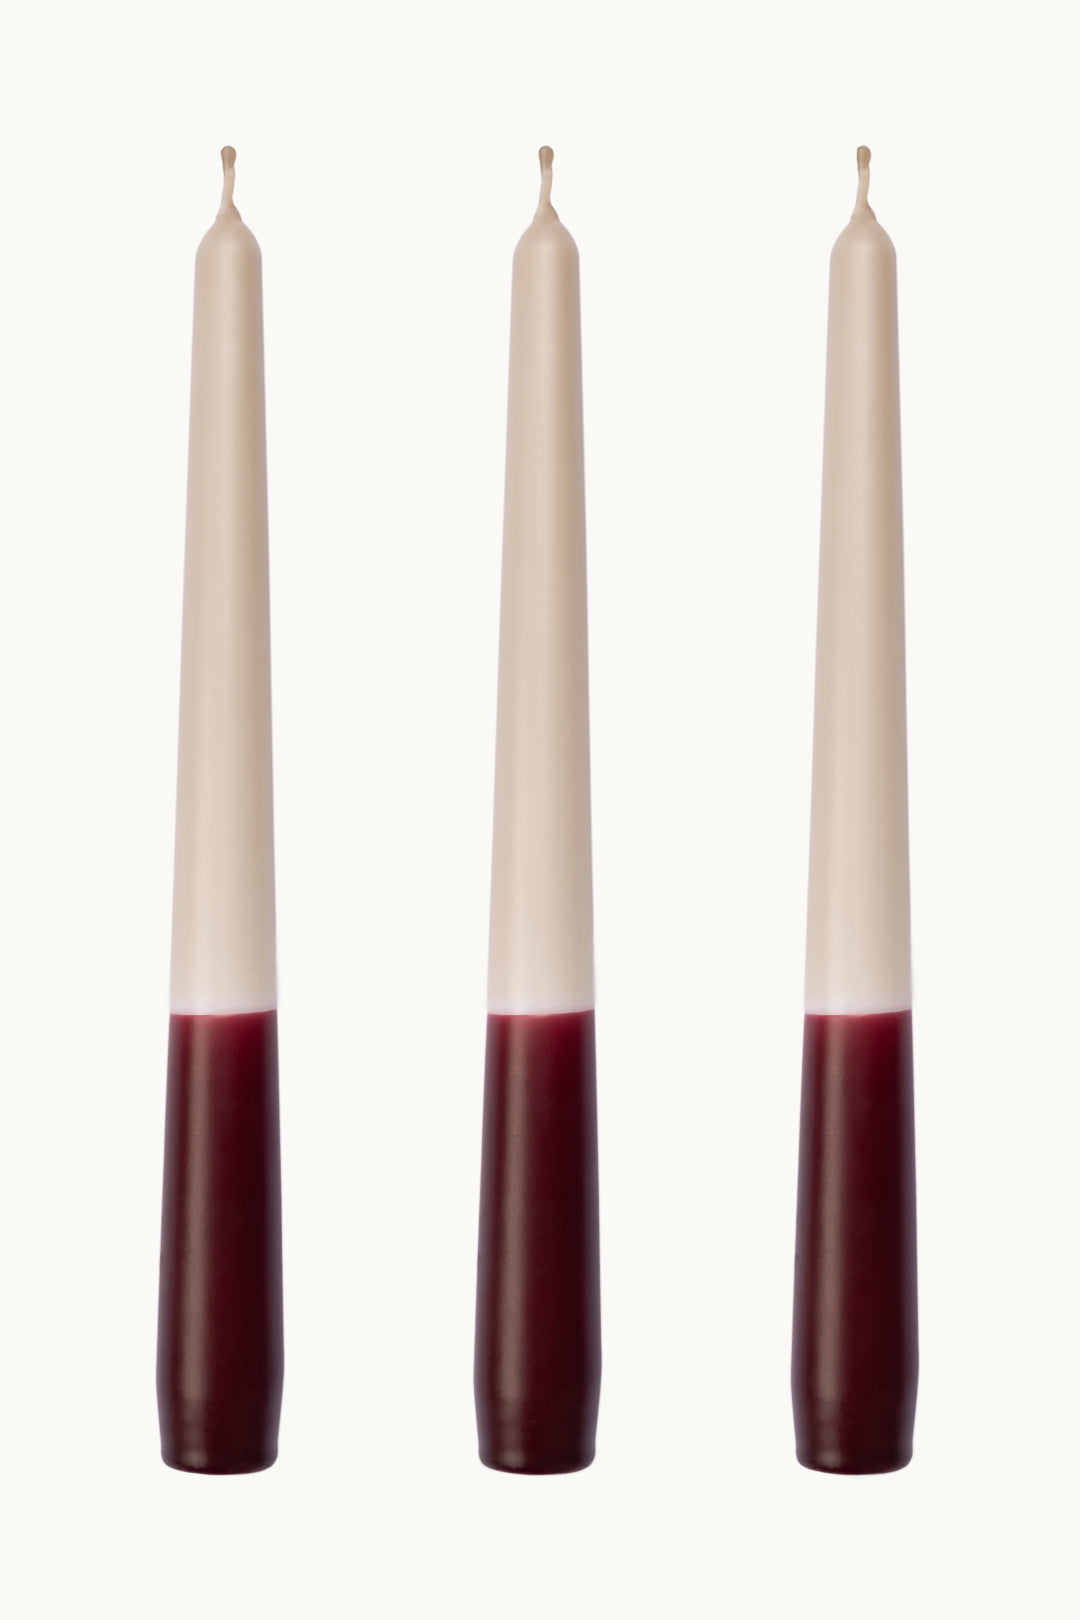 Burgundy red dip dye taper dinner candles. Made in England.